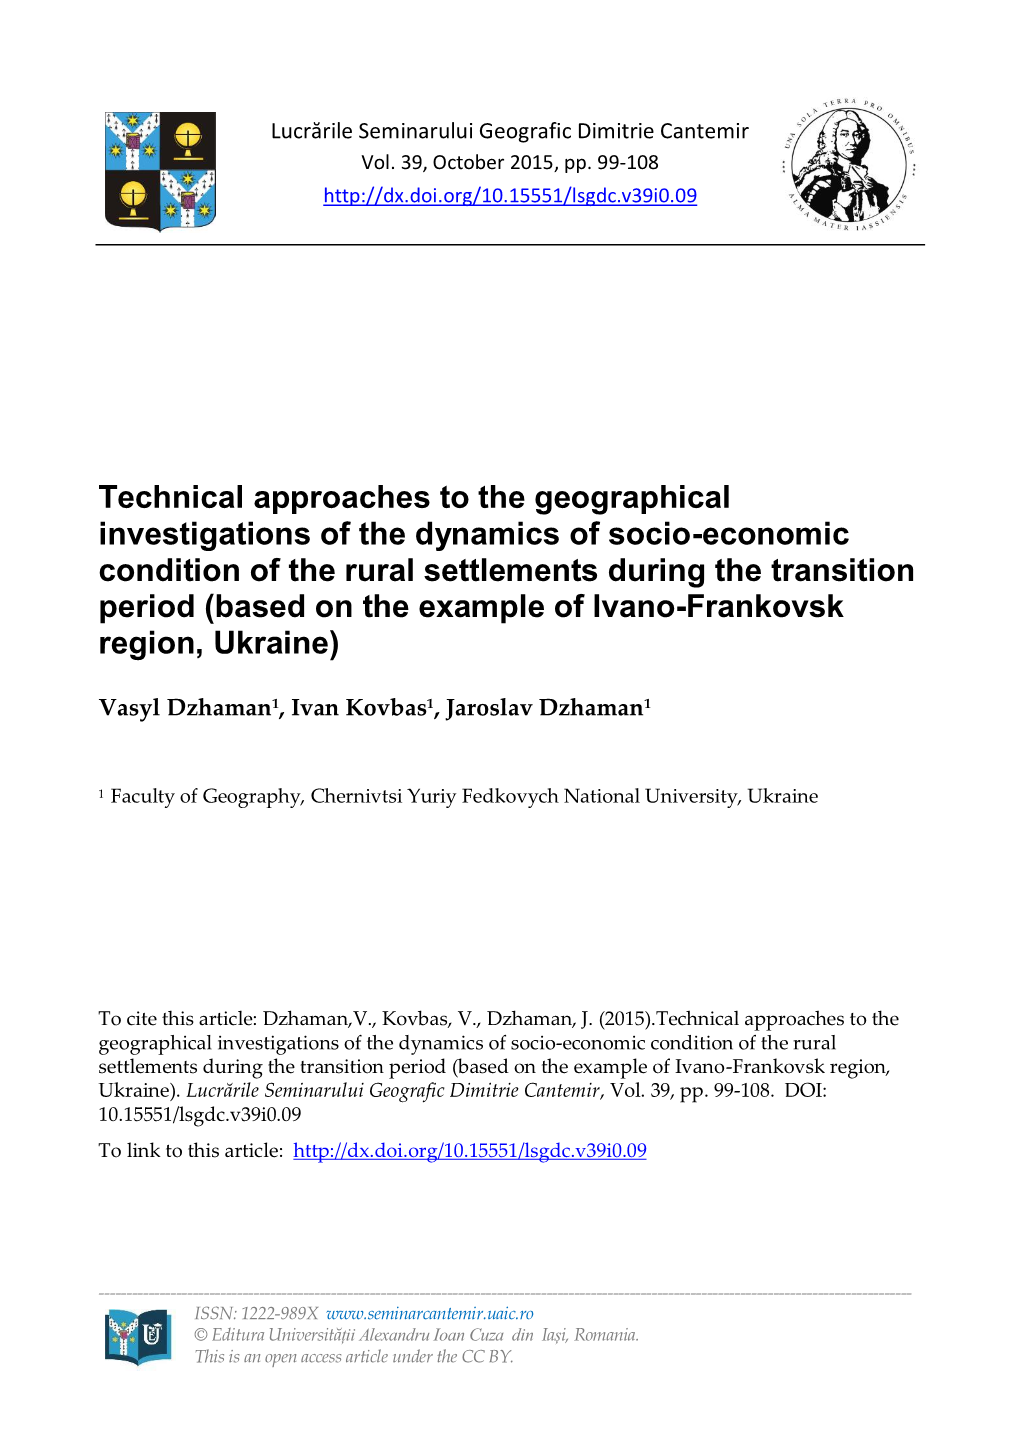 Technical Approaches to the Geographical Investigations of The